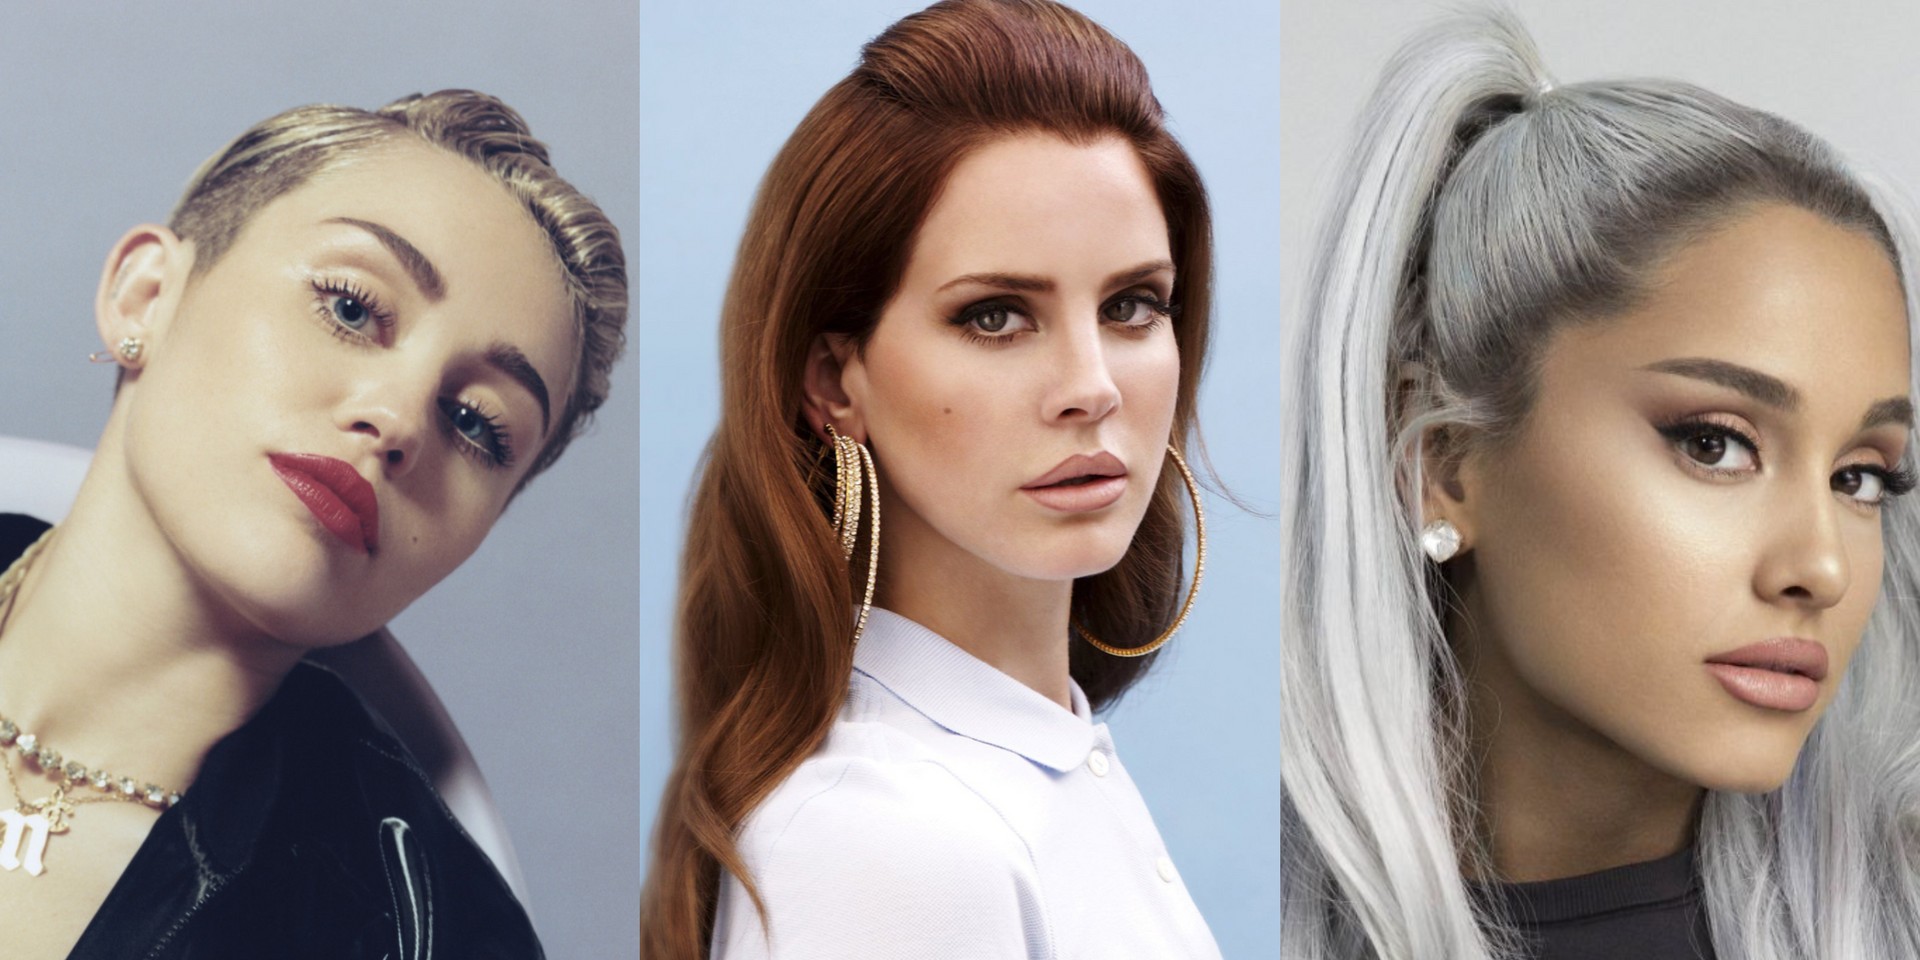 Miley Cyrus teases collaboration with Ariana Grande and Lana Del Rey for Charlie's Angels movie 